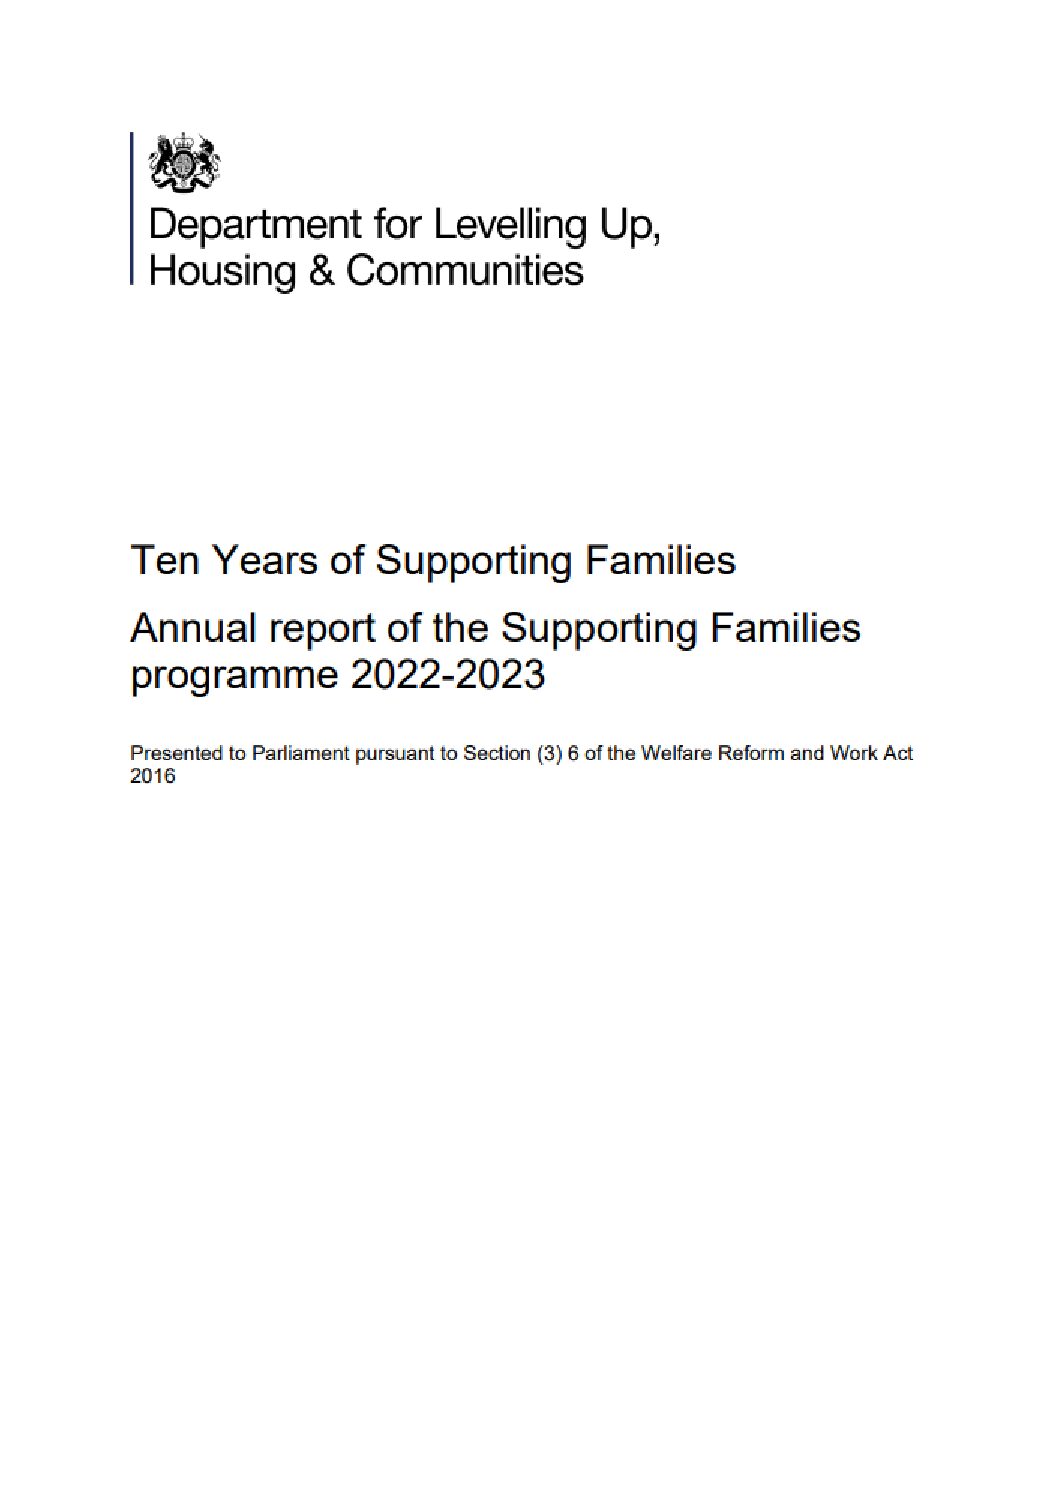 Ten Years of Supporting Families: Annual report of the Supporting Families programme 2022-2023